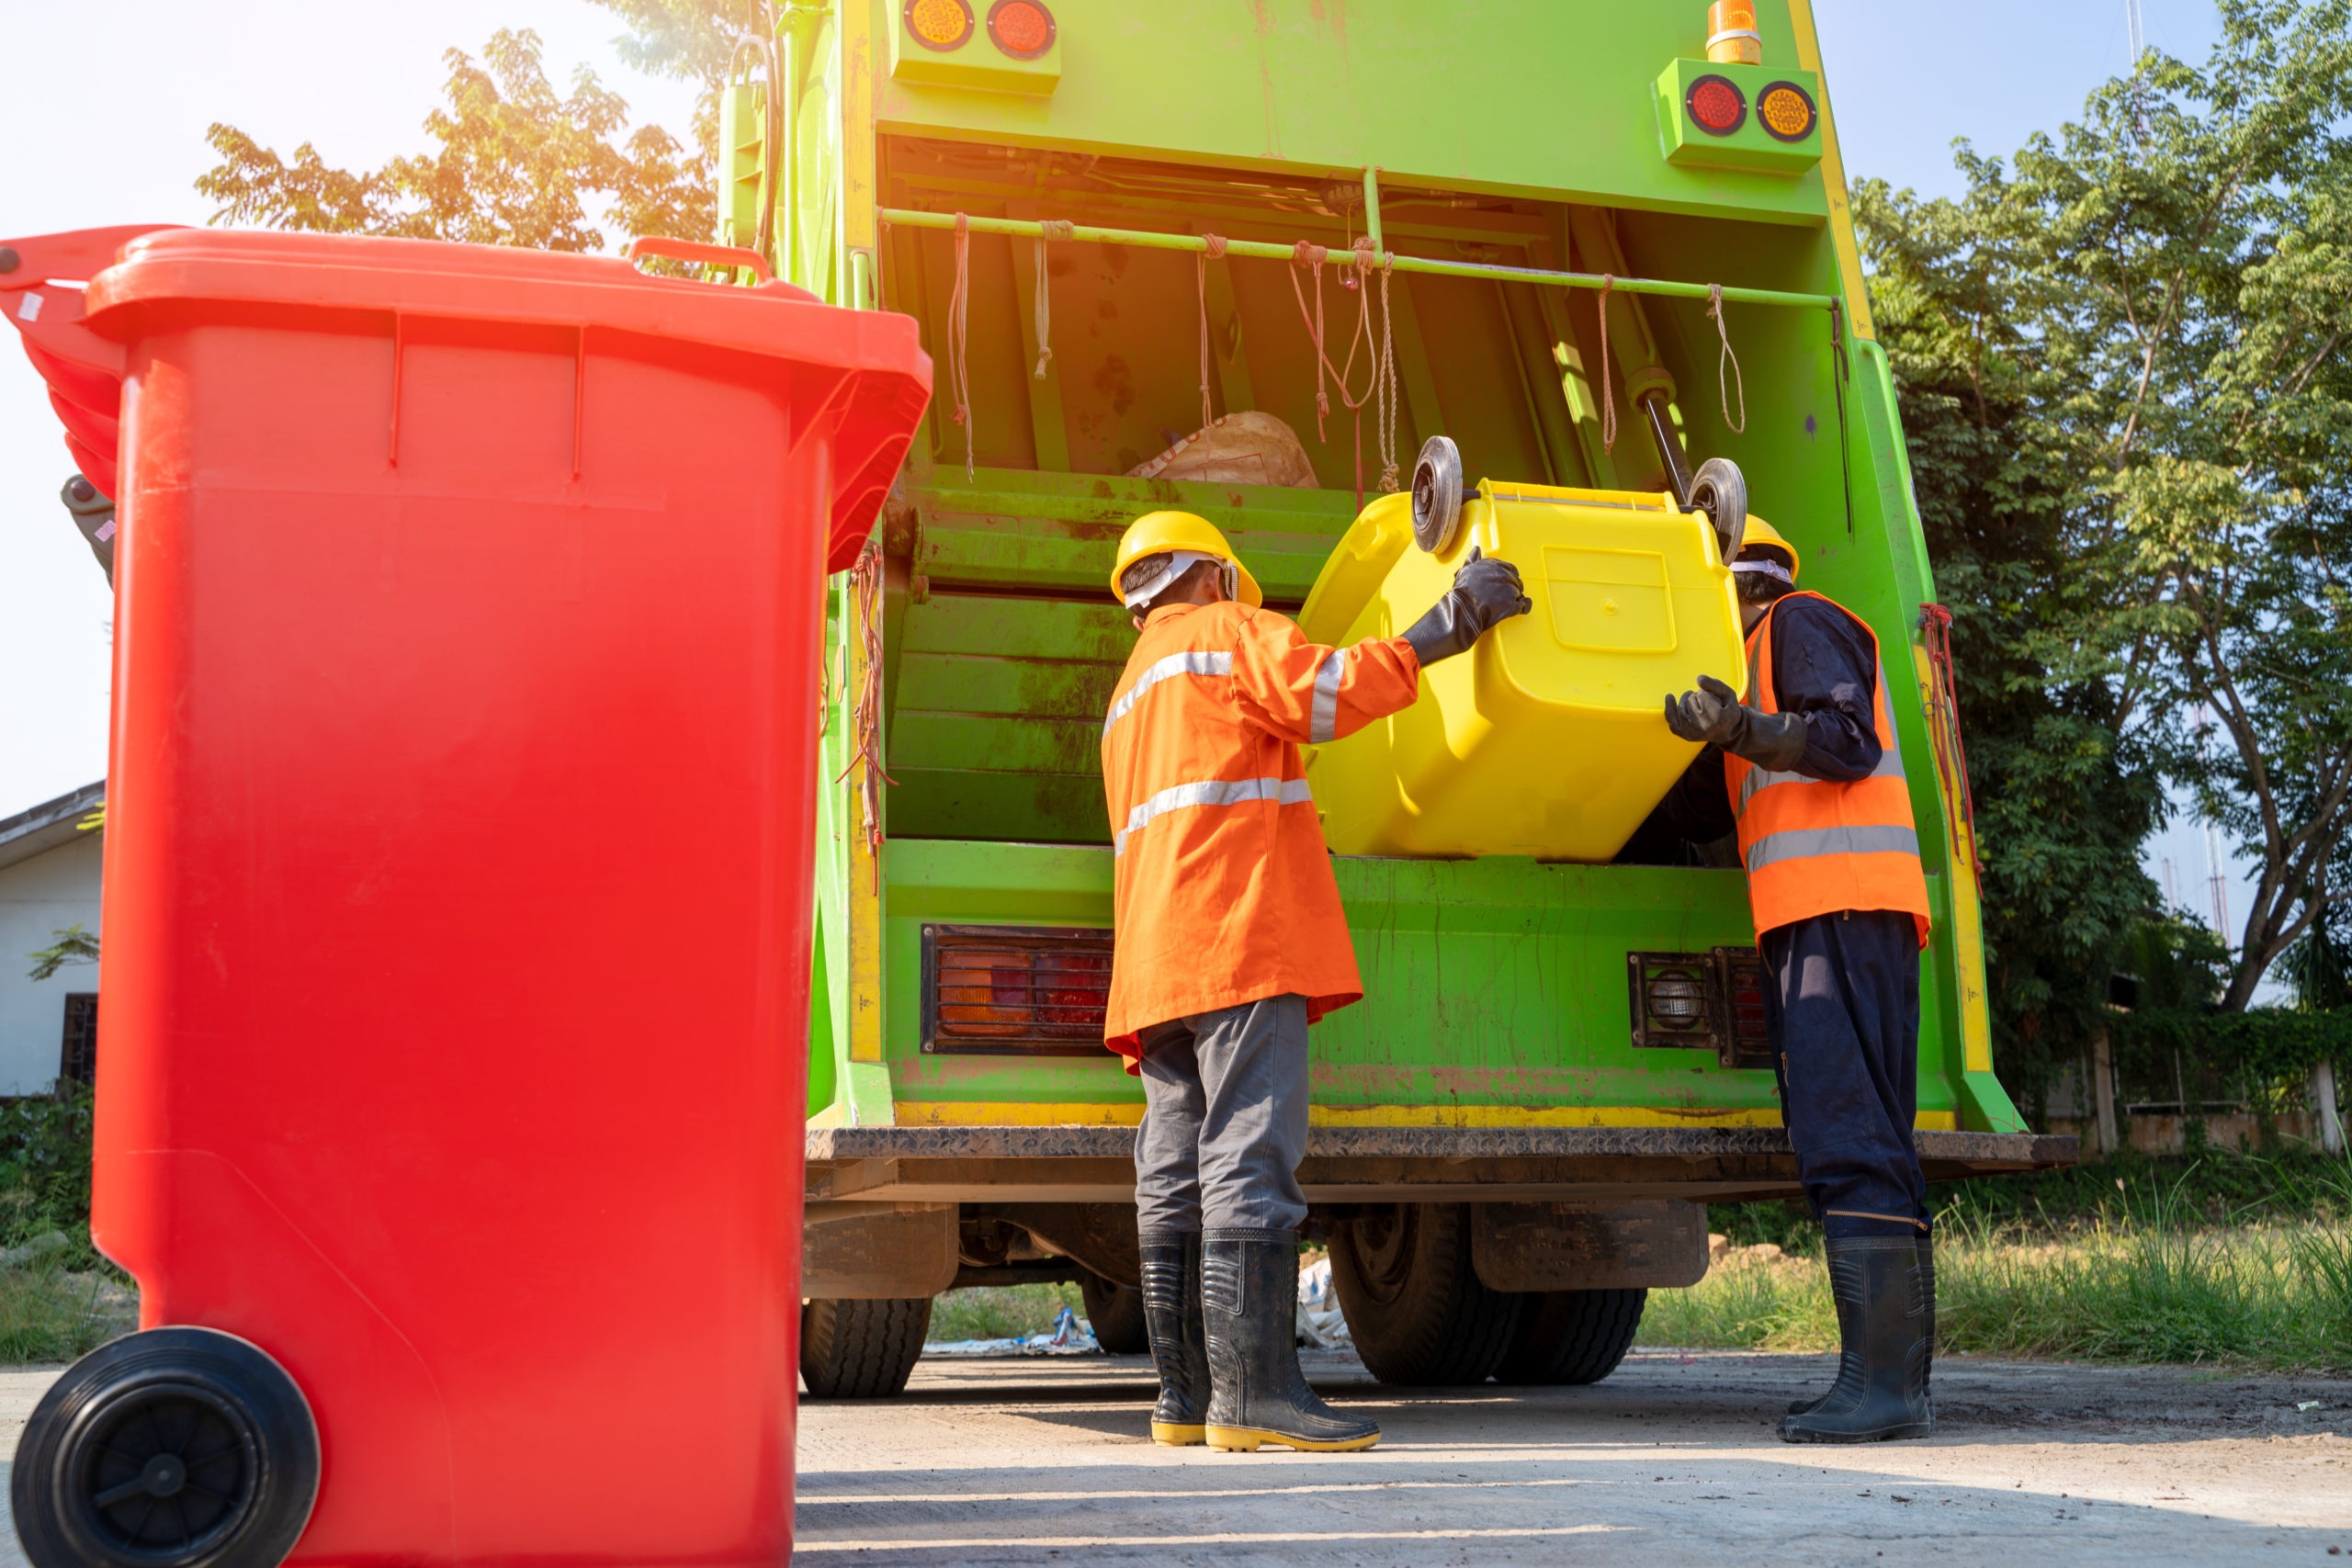 Two garbage men working together on emptying dustbins for trash